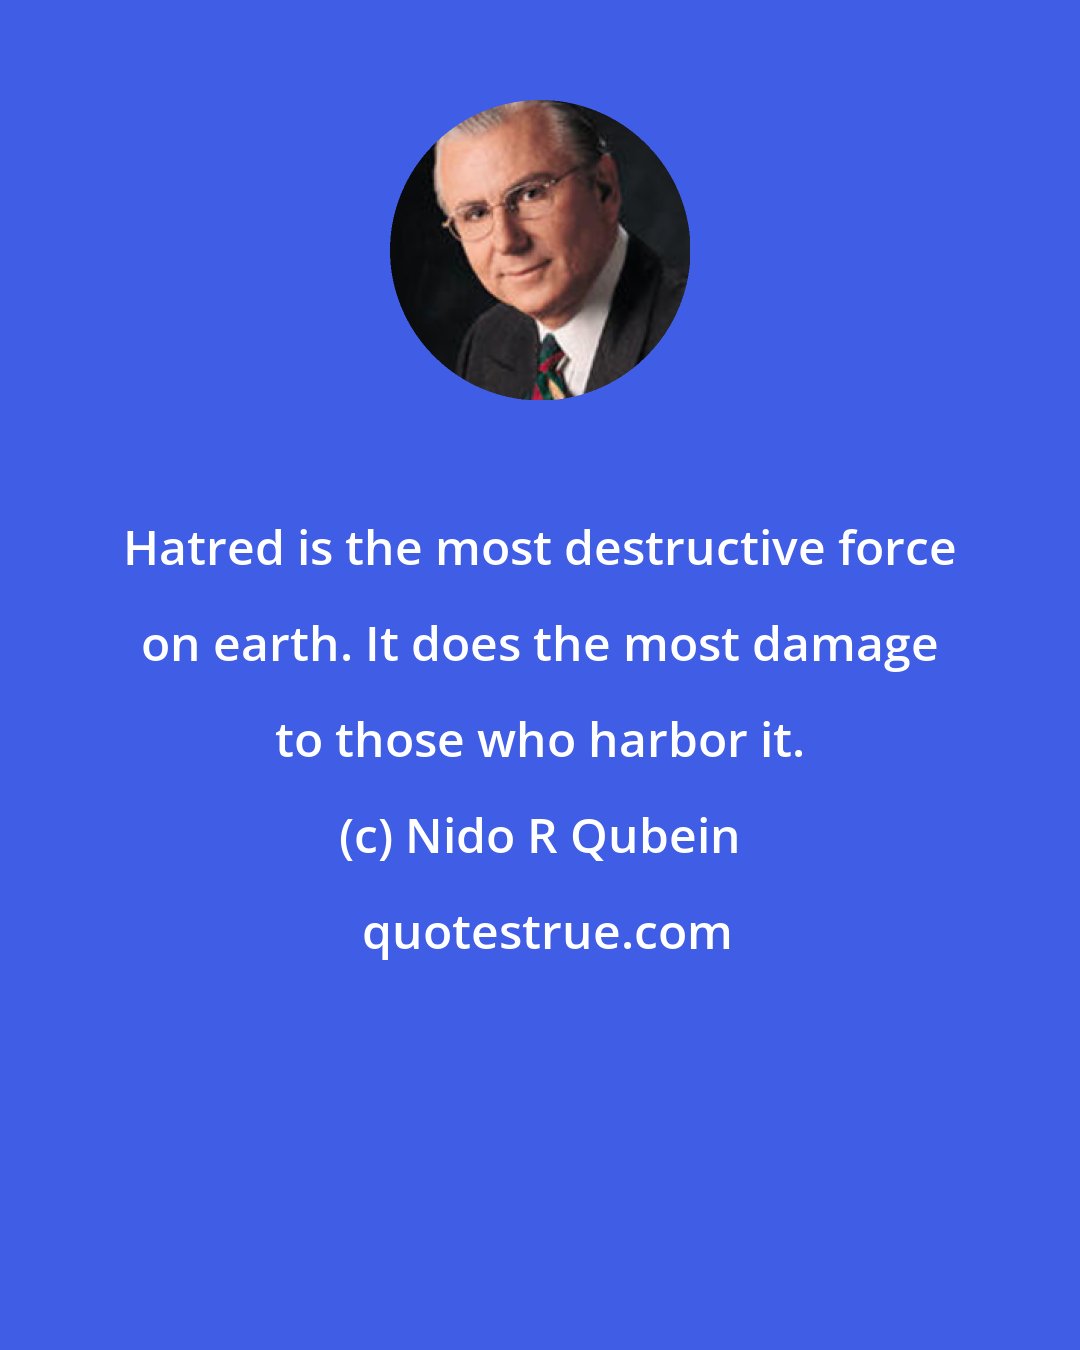 Nido R Qubein: Hatred is the most destructive force on earth. It does the most damage to those who harbor it.